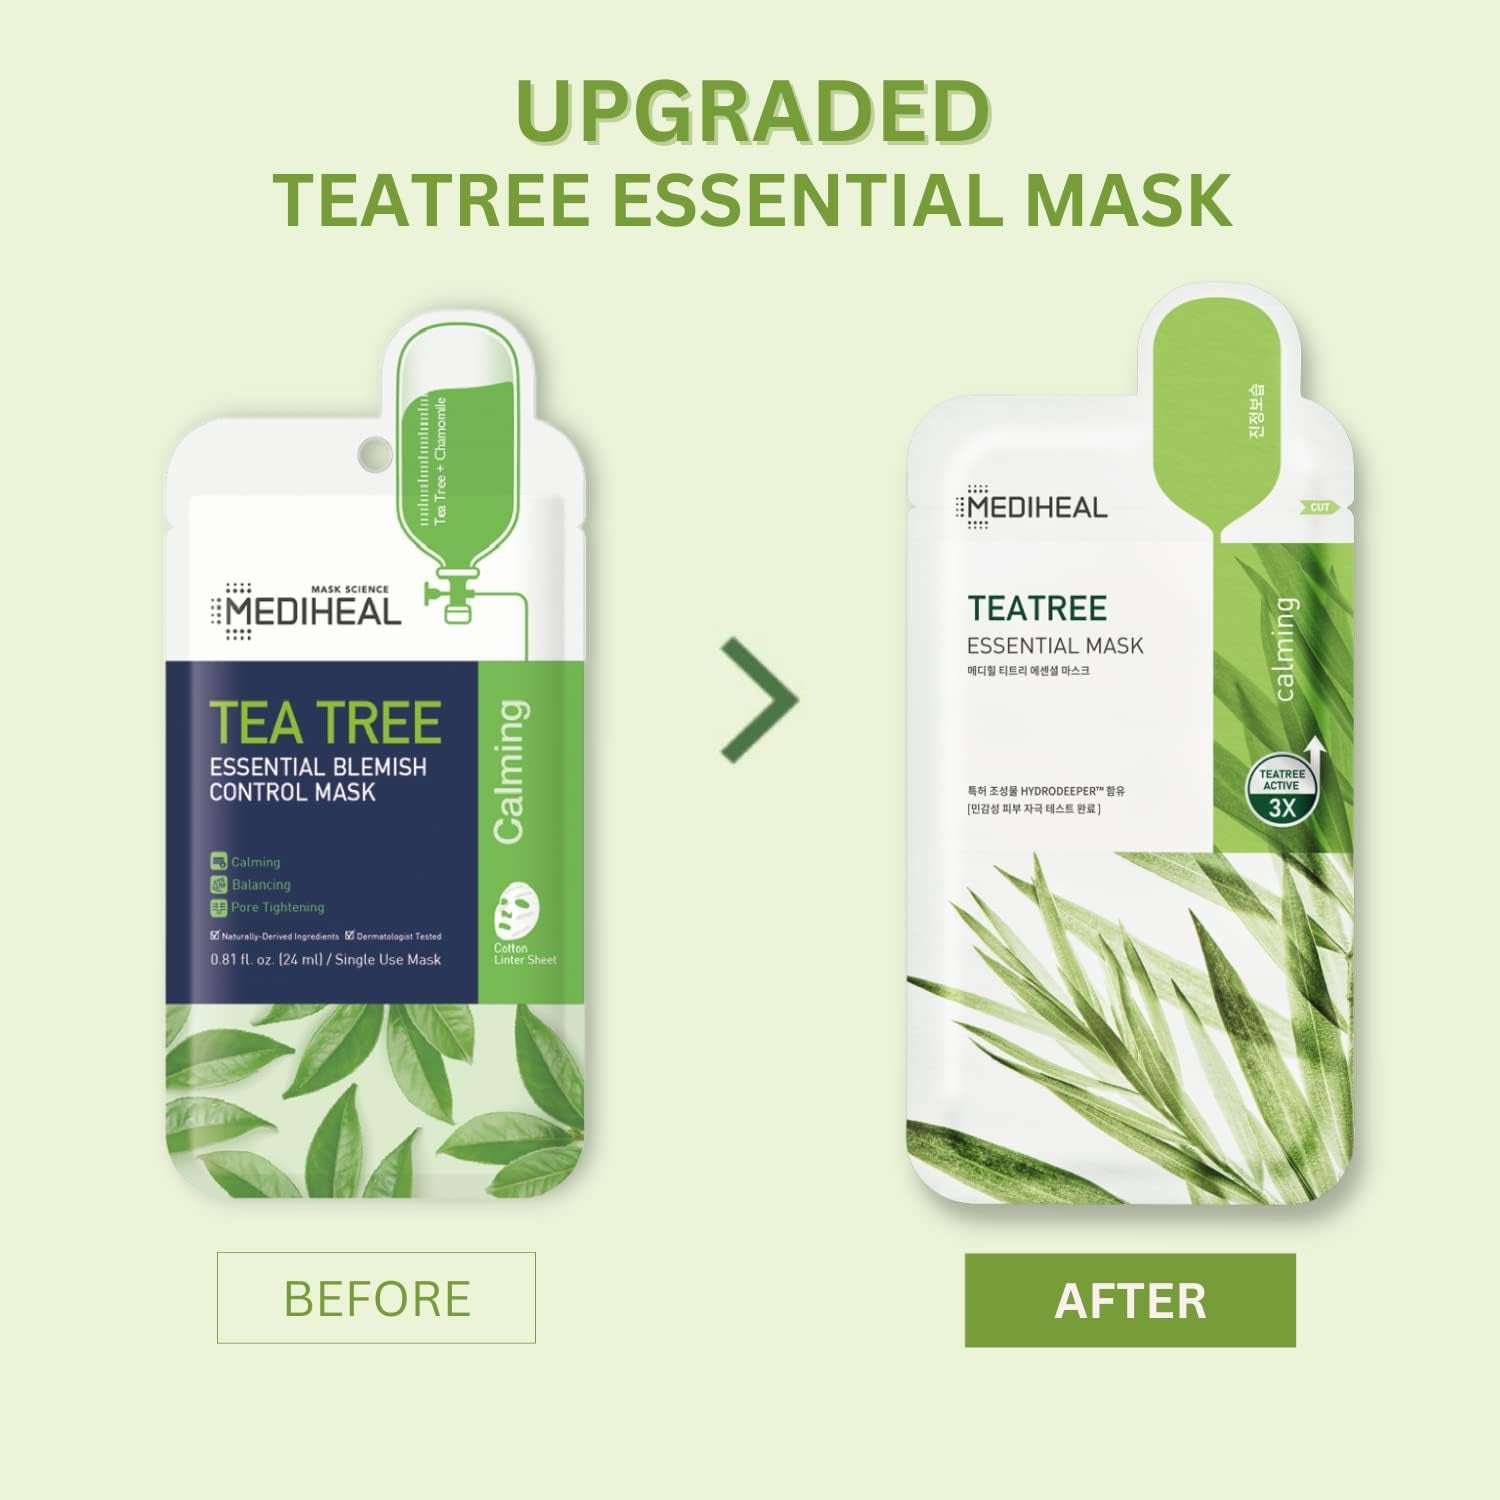 Mediheal Official Best Korean Sheet Mask - Tea Tree Essential Face Mask 20 Sheets Skin Soothing Treat Blemishes Sebum Control for All Skin Types Value Sets Acne Prone